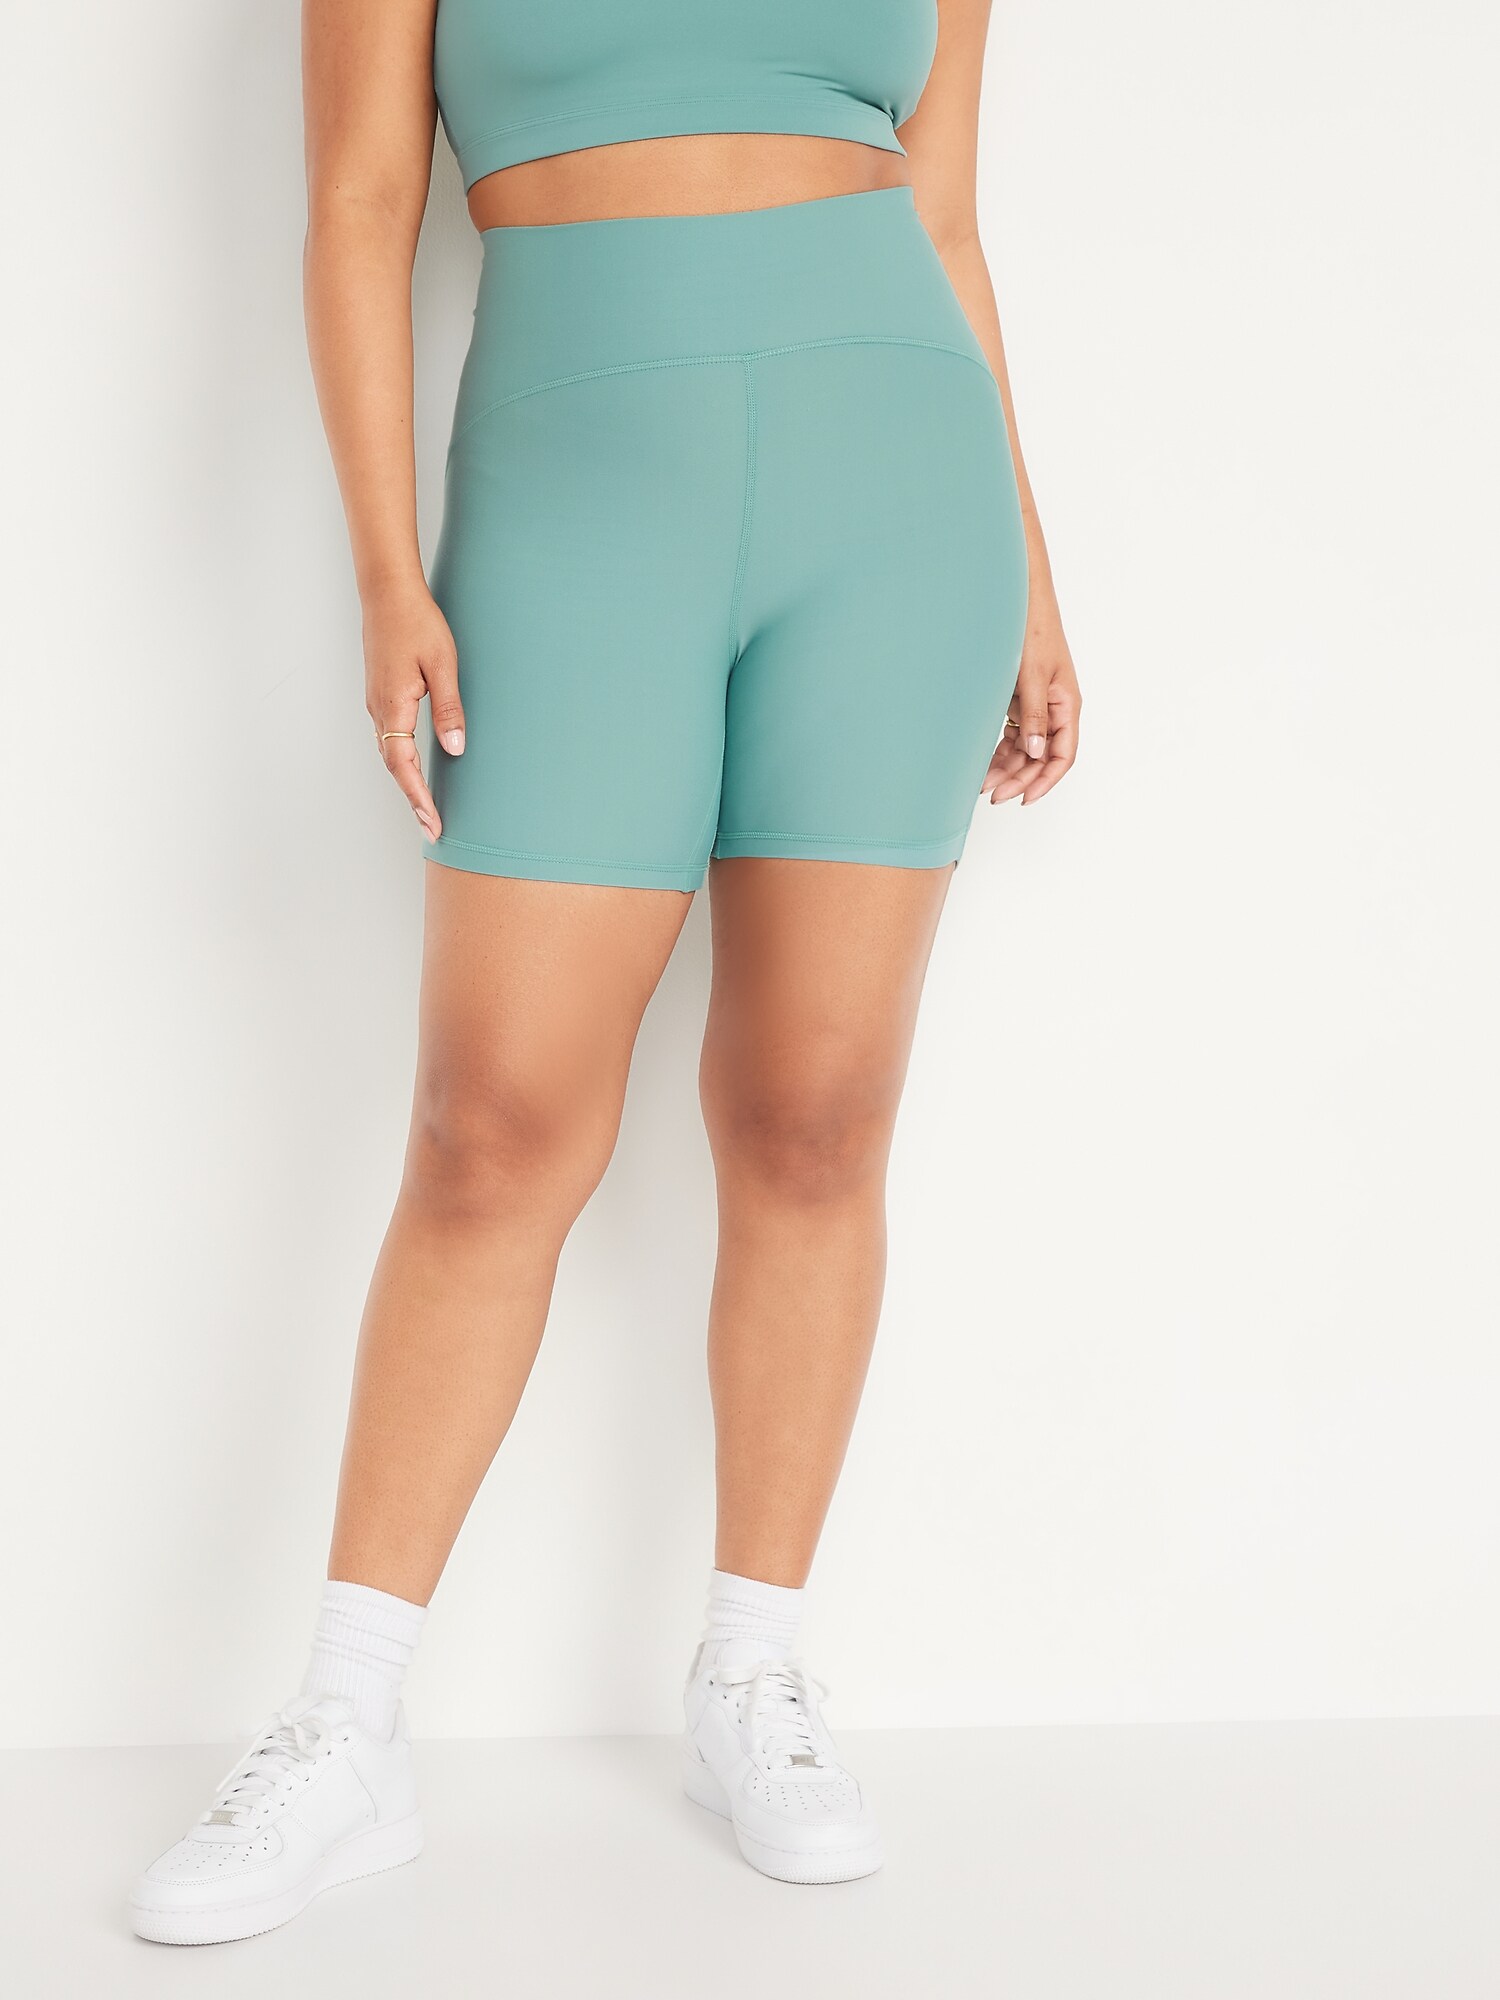 Old Navy Extra High-Waisted PowerLite Lycra® ADAPTIV Biker Shorts for Women  -- 6-inch inseam, Old Navy deals this week, Old Navy flyer